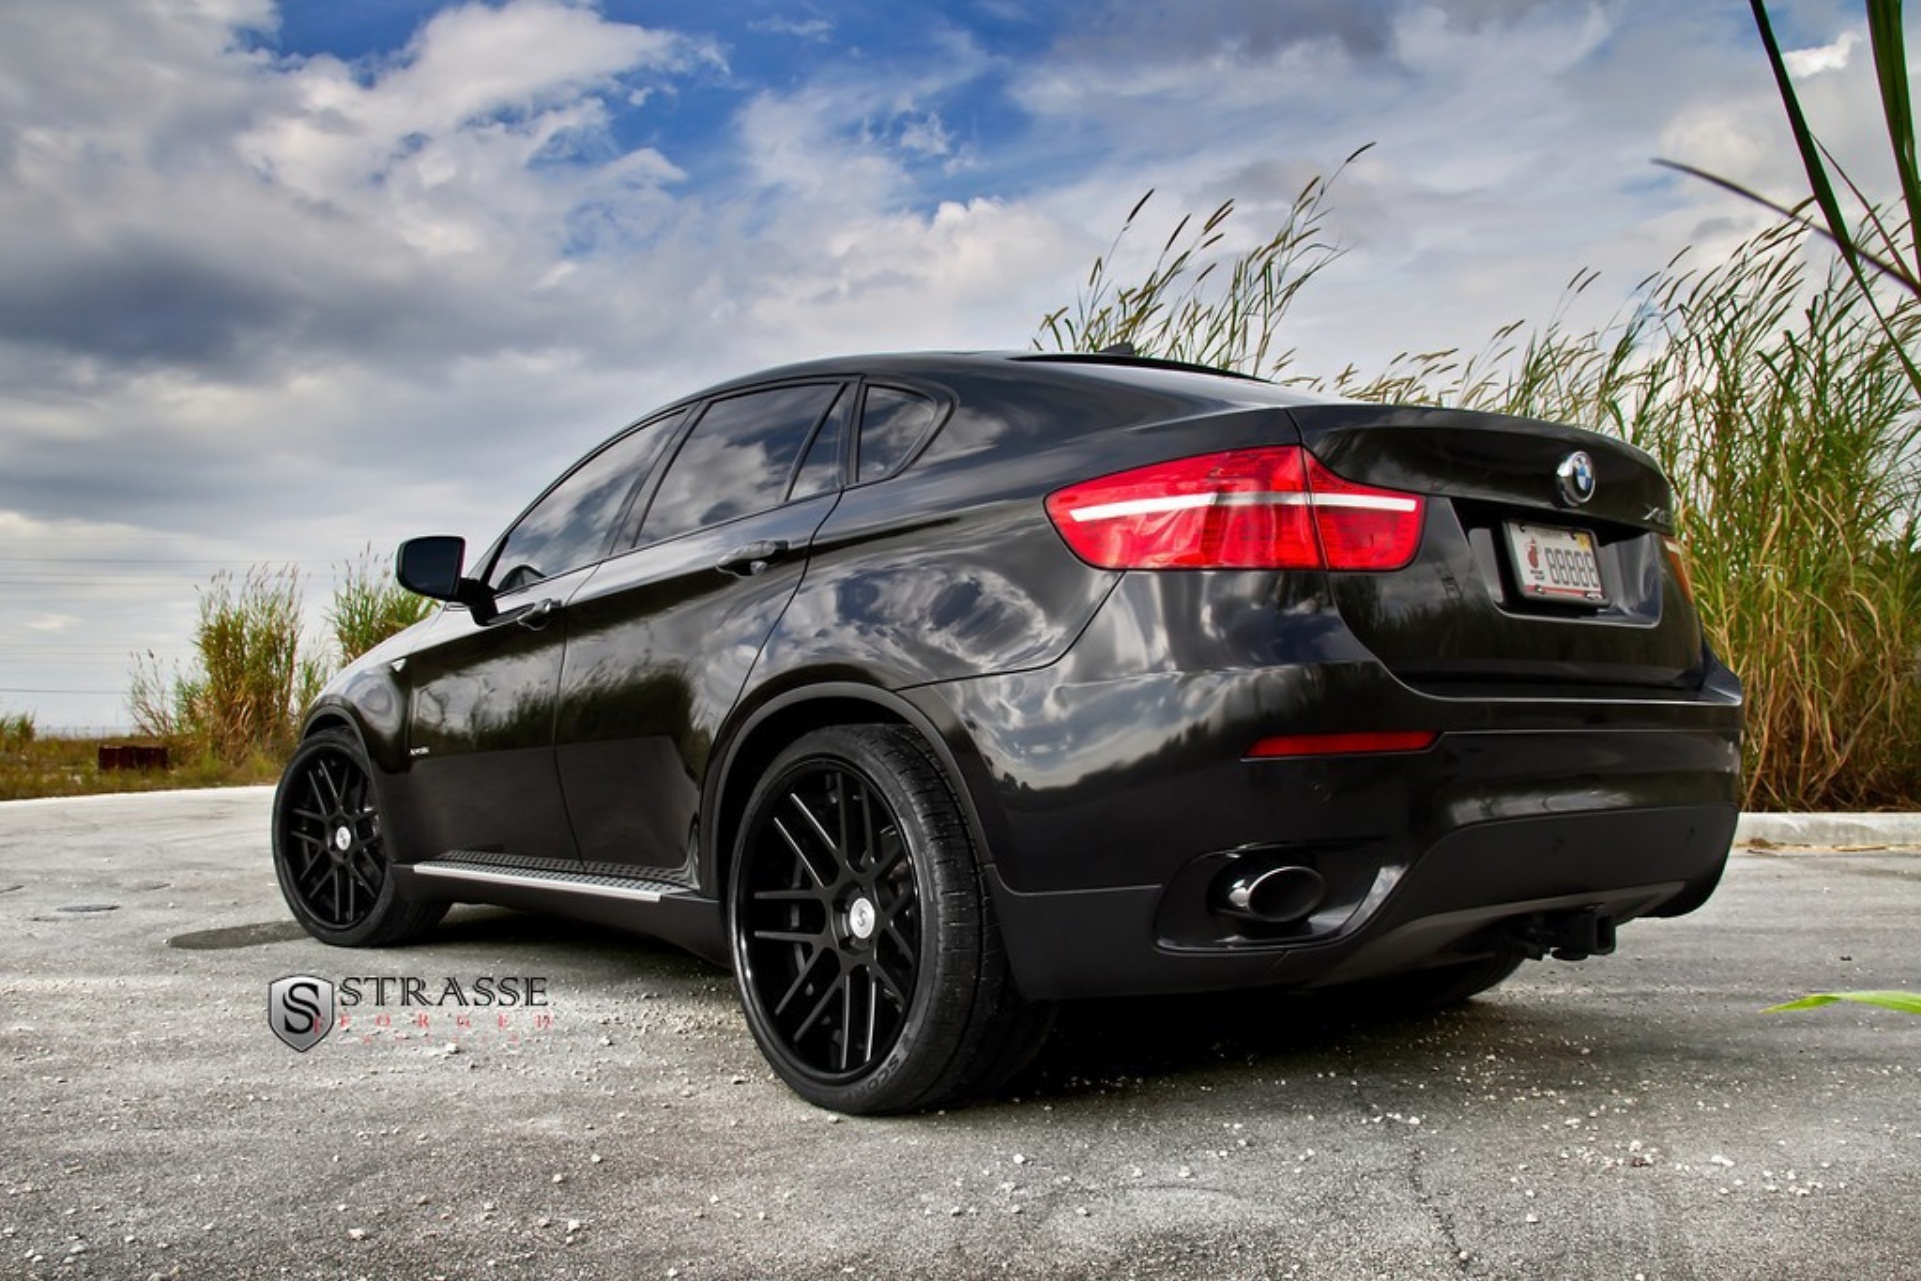 Bmw X6 Comes With Matte Black Wheels From Strasse Autoevolution.